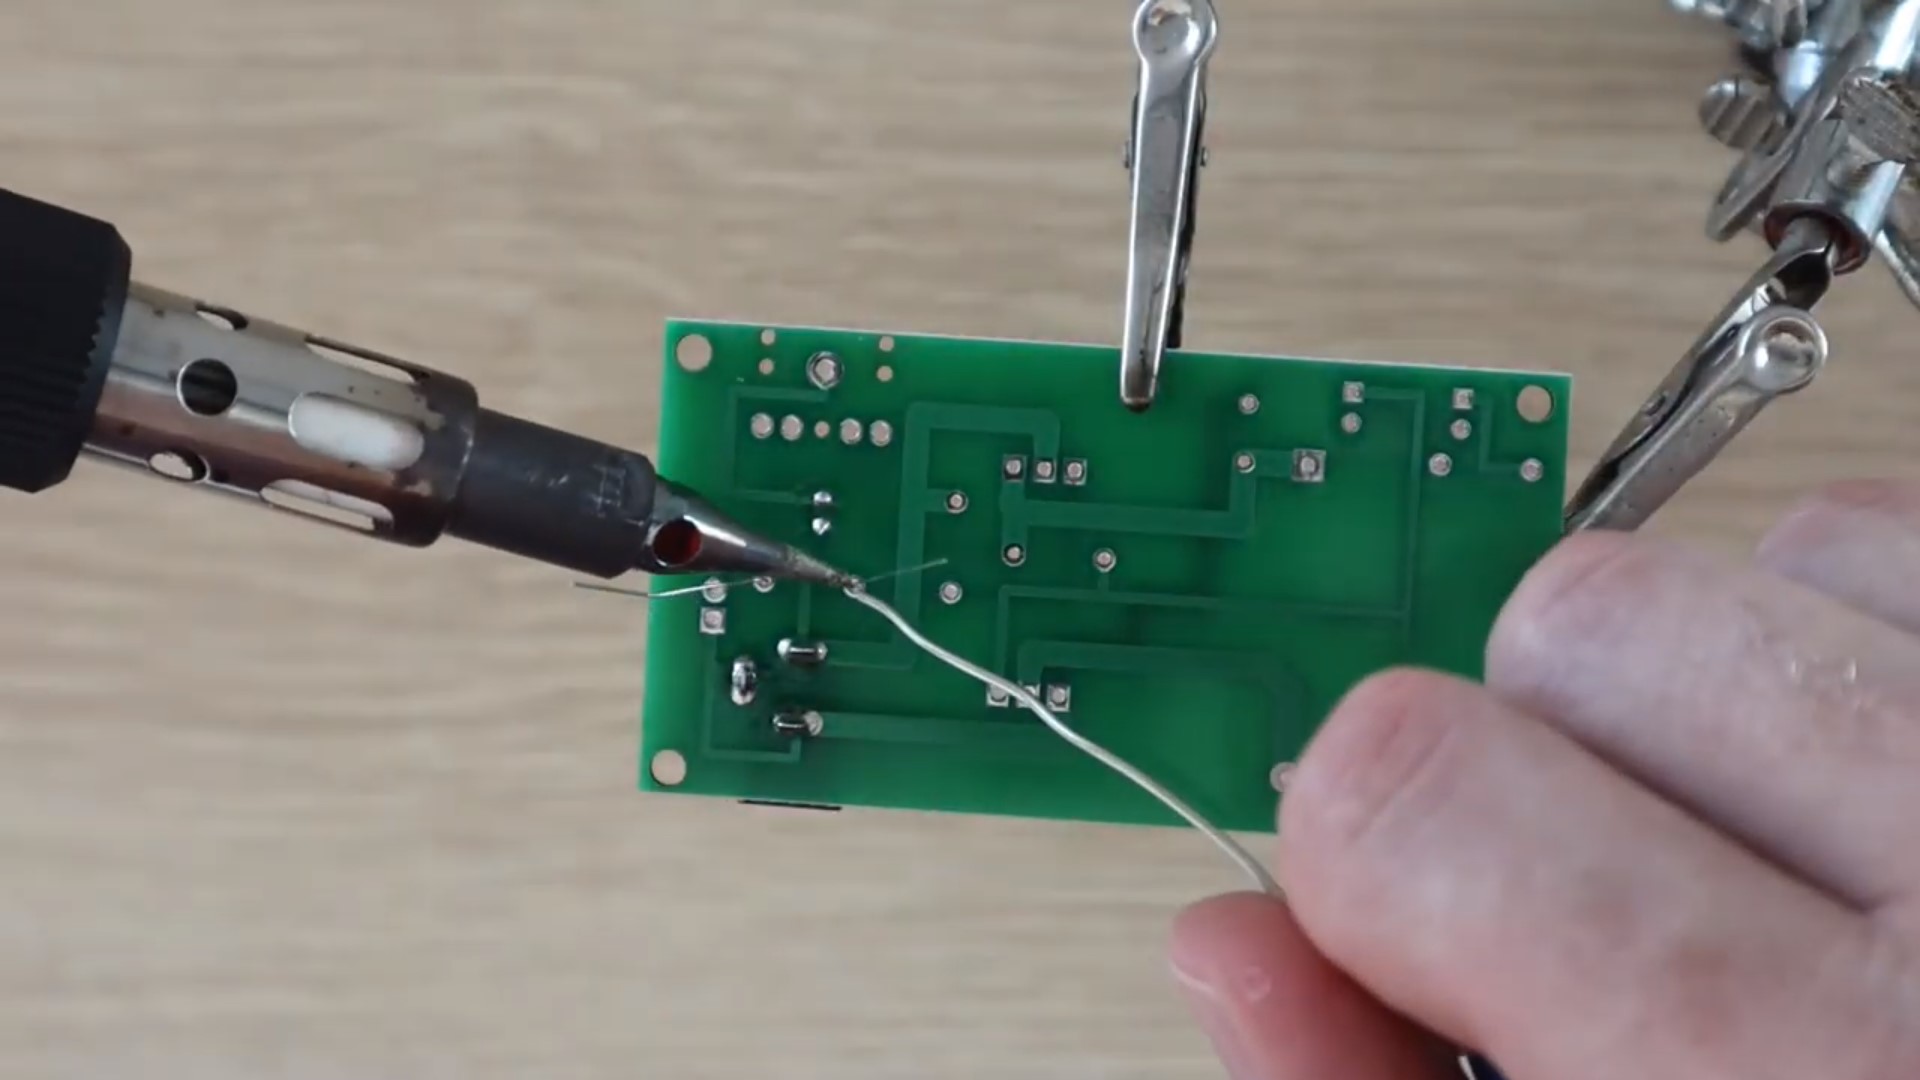 Soldering Components Onto PCB